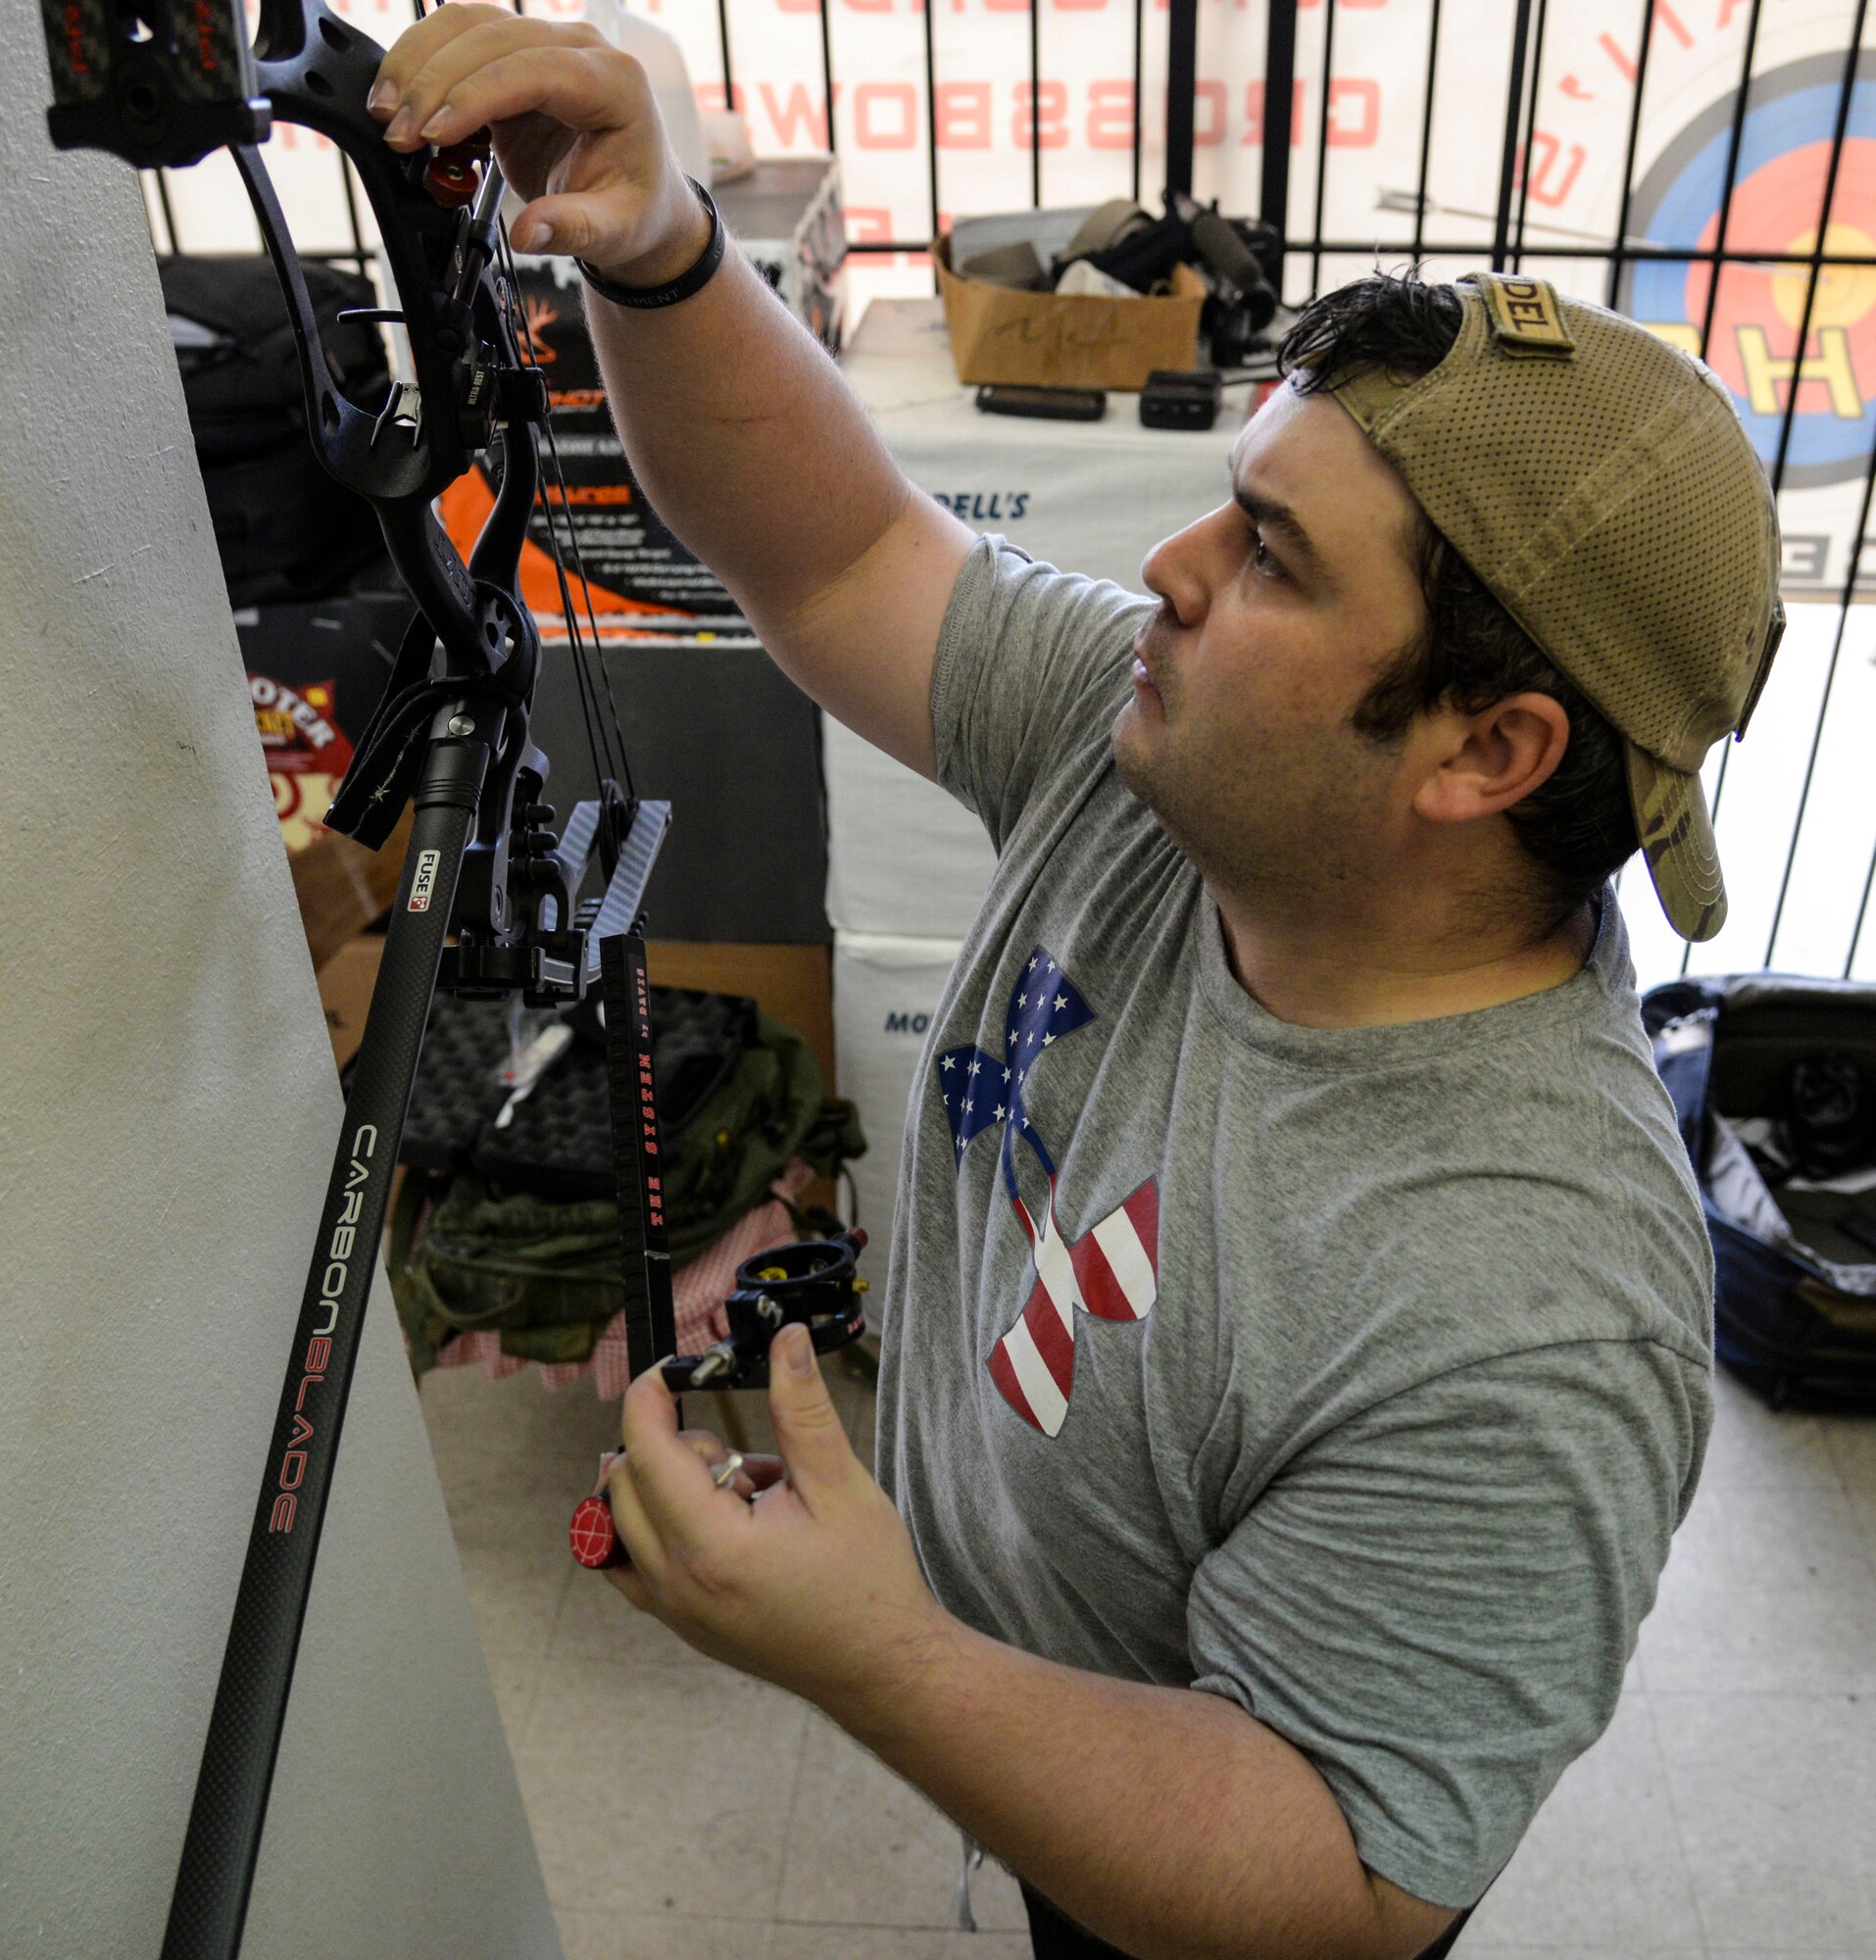 U.S. Air Force Staff Sgt. Seth Pena, a former tactical control air party member now assigned to the 59th Medical Wing's Airman Medical Transition Unit, mounts a scope to his compound bow at a local archery facility in San Antonio Sept. 12, 2014. Pena was severely injured March 2013 when a drunk driver ran a red light, crashing into his motorcycle.  (U.S. Air Force photo/Senior Airman Michael Ellis)